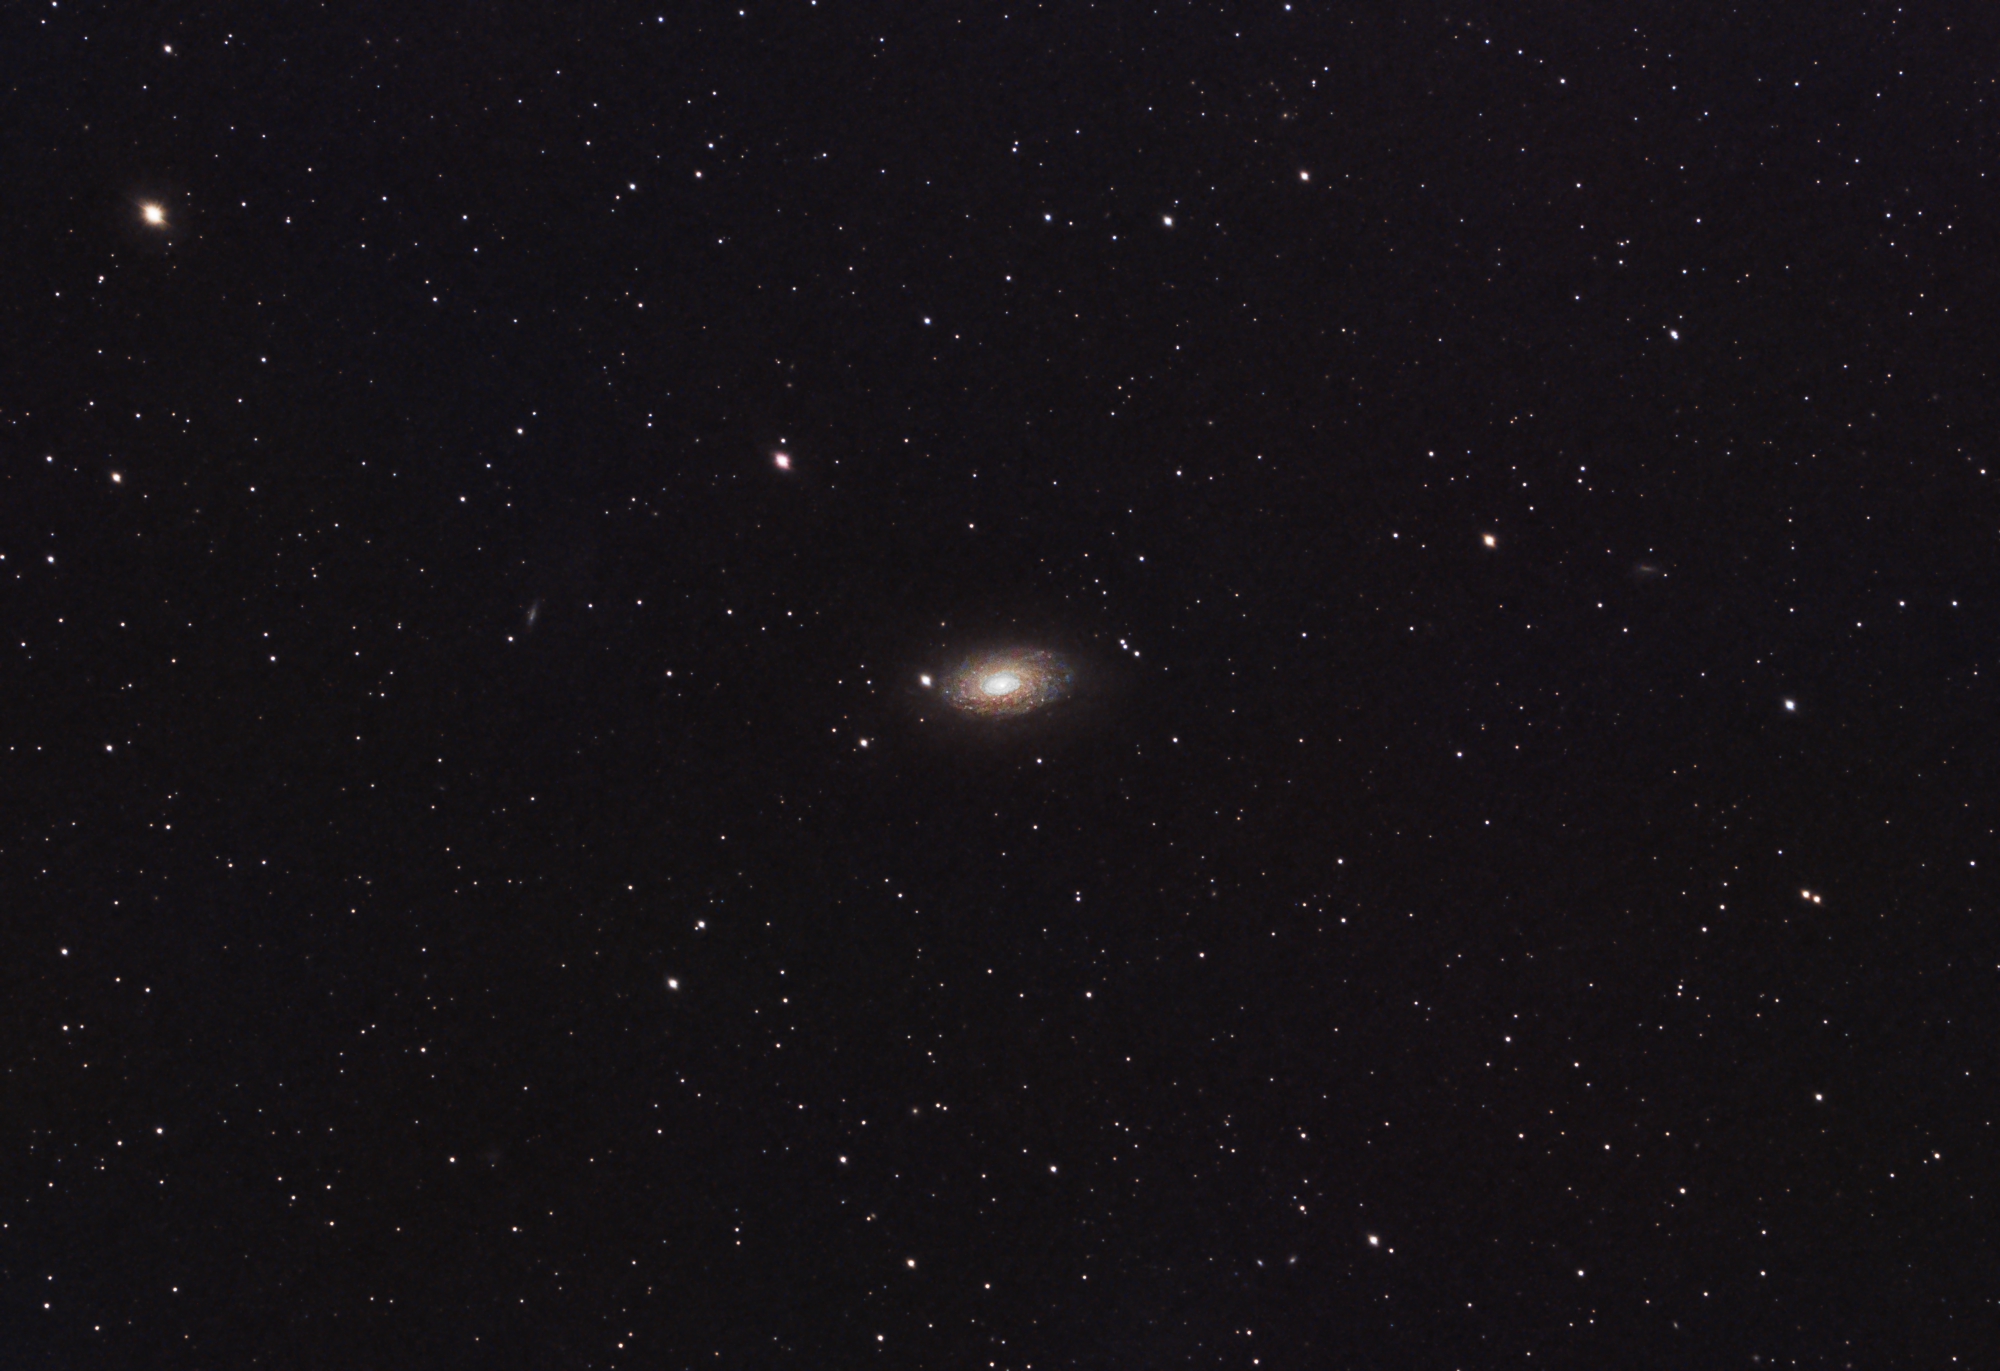 M63 - the Sunflower Galaxy, with a new telescope